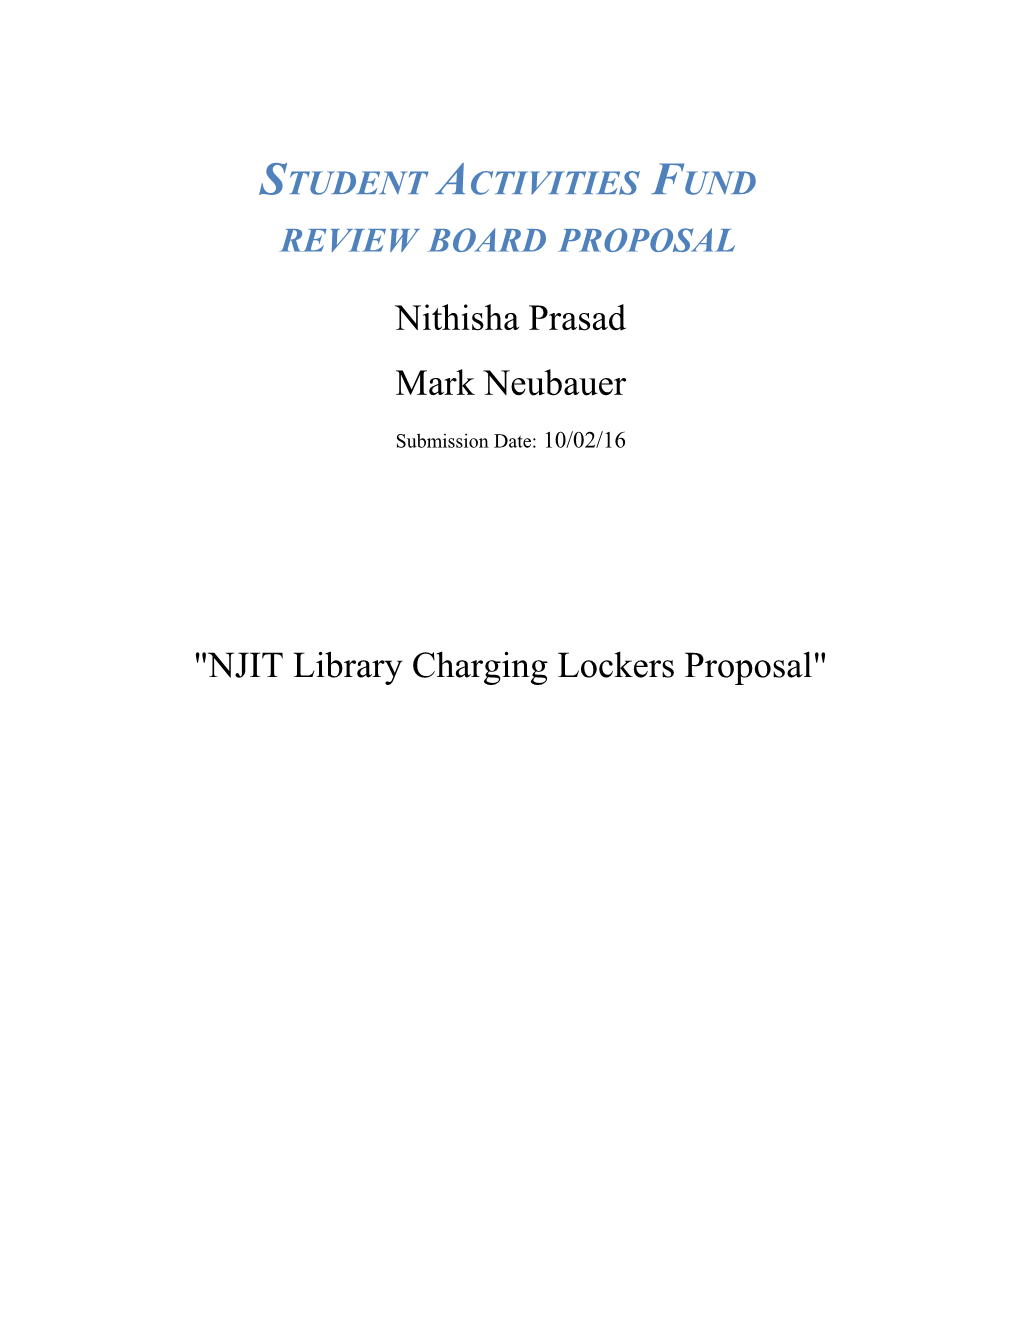 Student Activities Fund Review Board Proposal